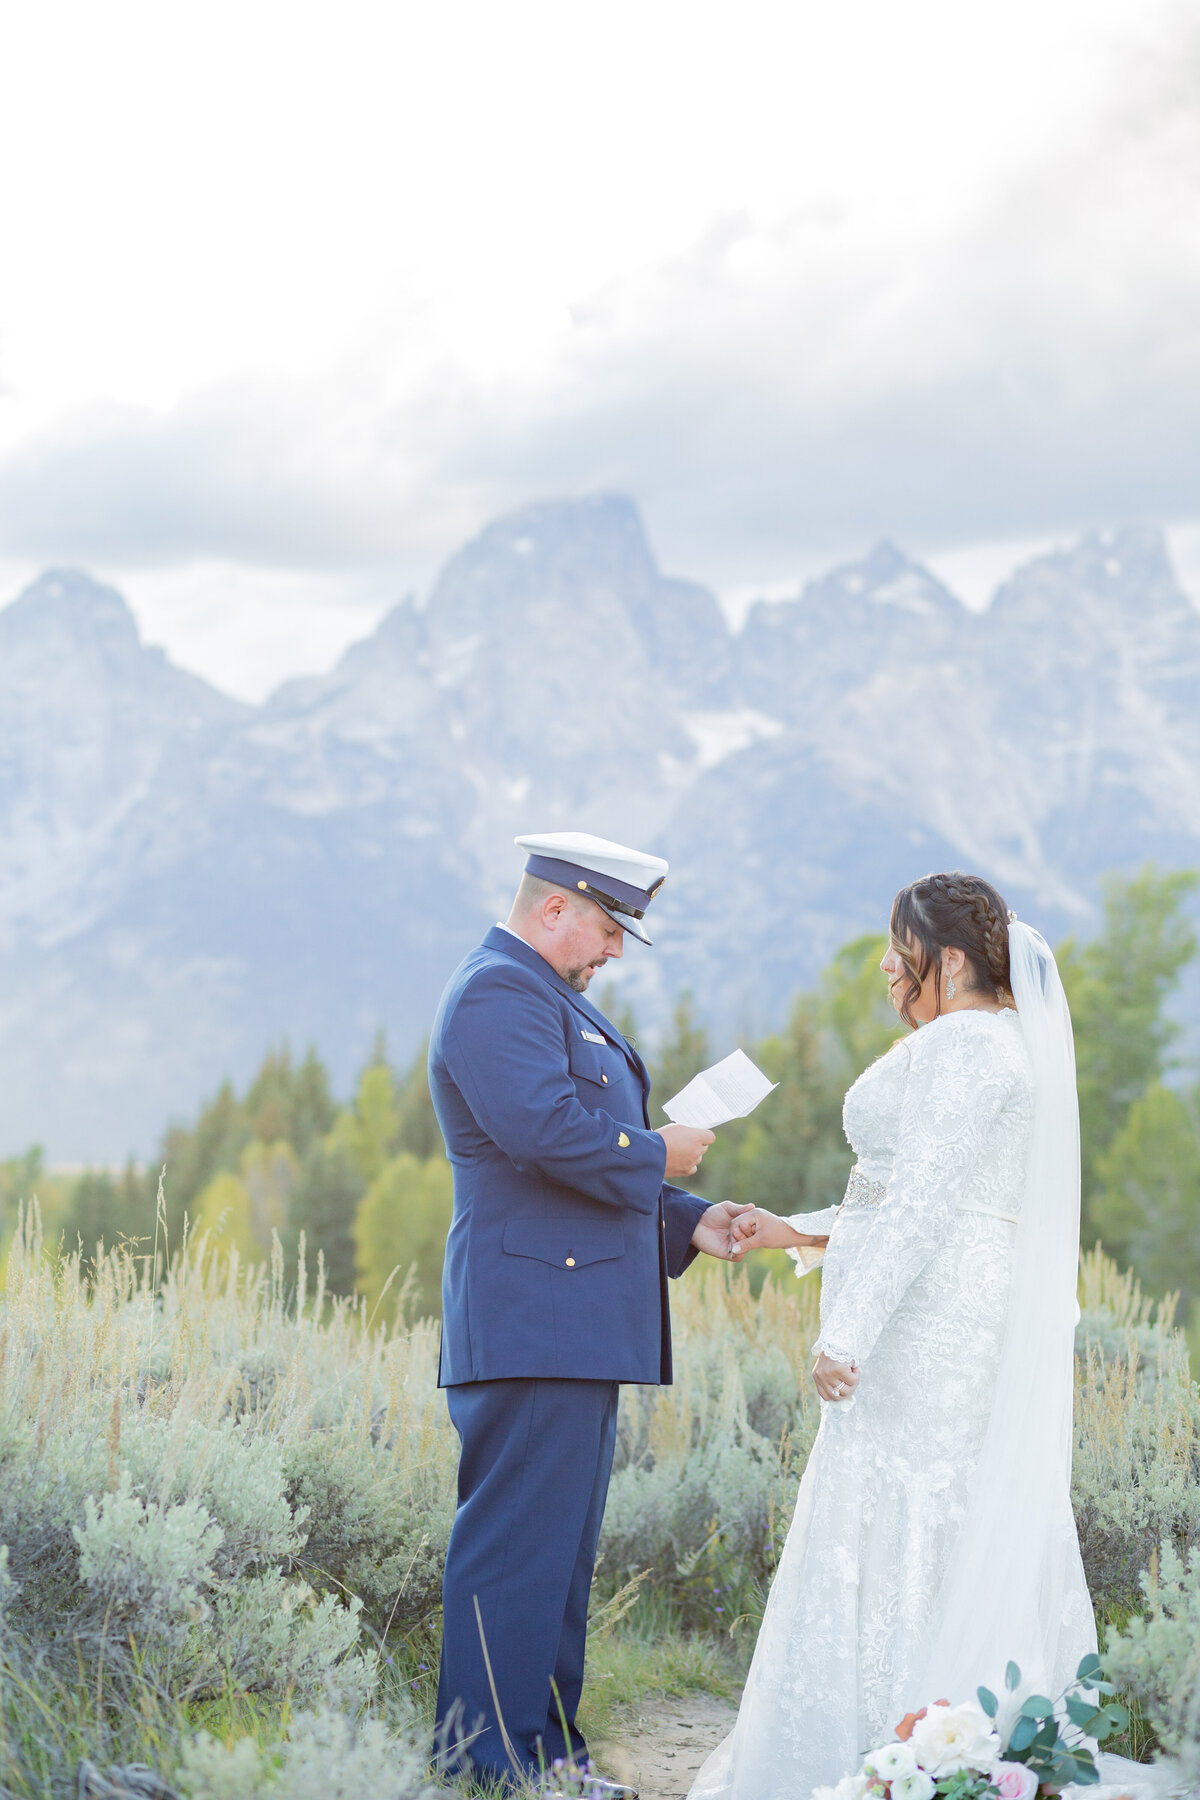 Idaho Falls Photographers capture outdoor elopement when bride and groom are reading vows to one another